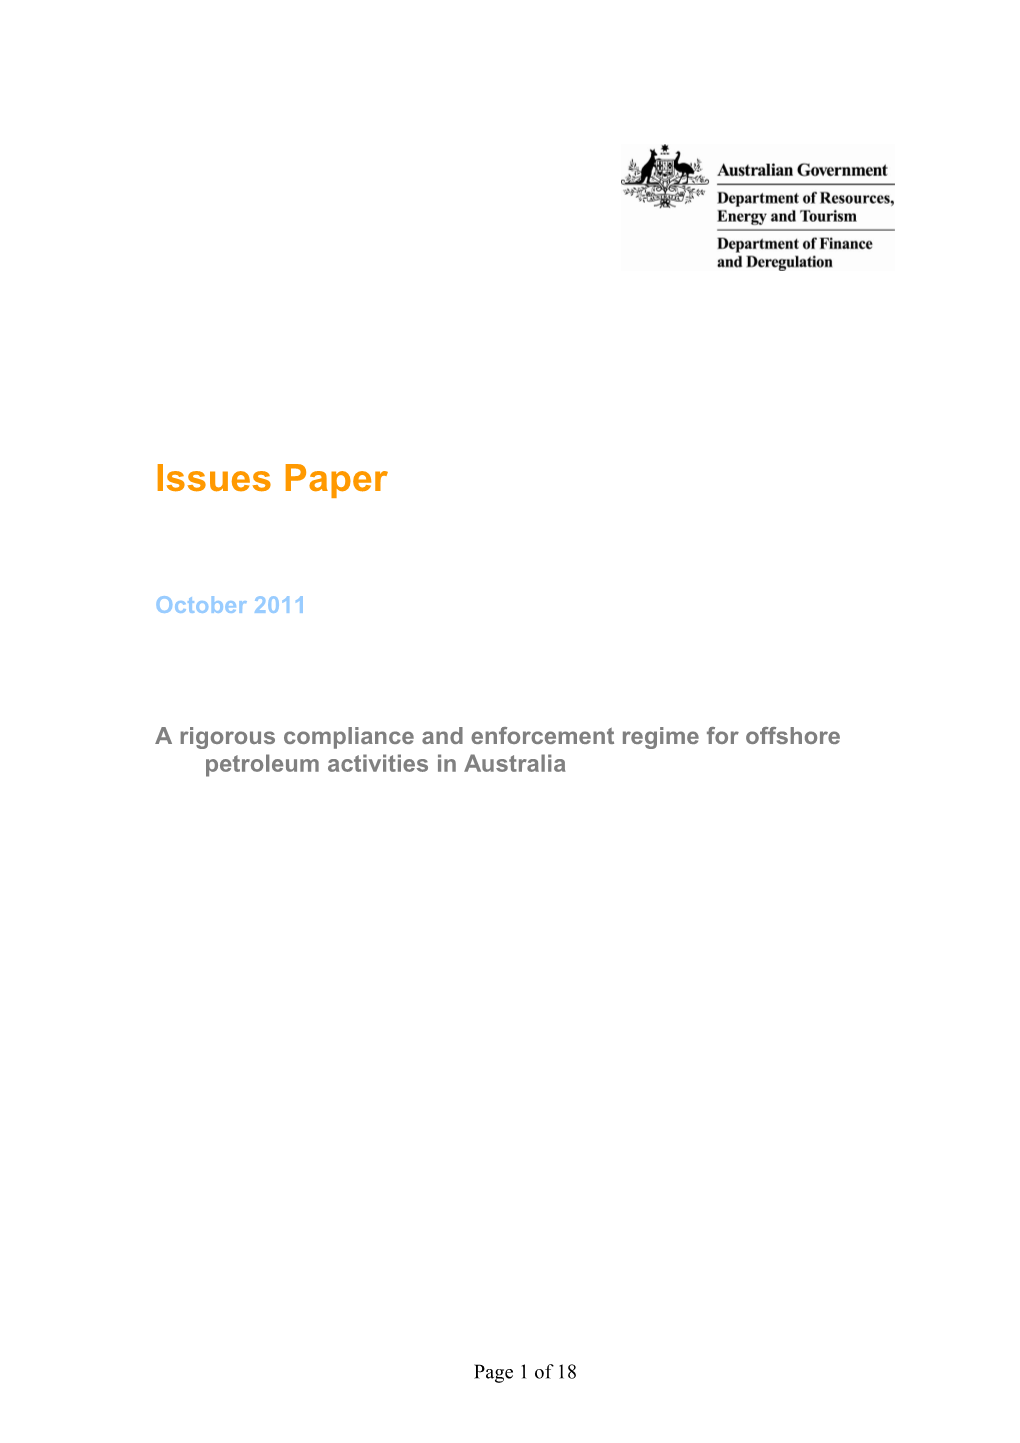 Issues Paper: a Rigorous Compliance and Enforcement Regime for Offshore Petroleum Activities